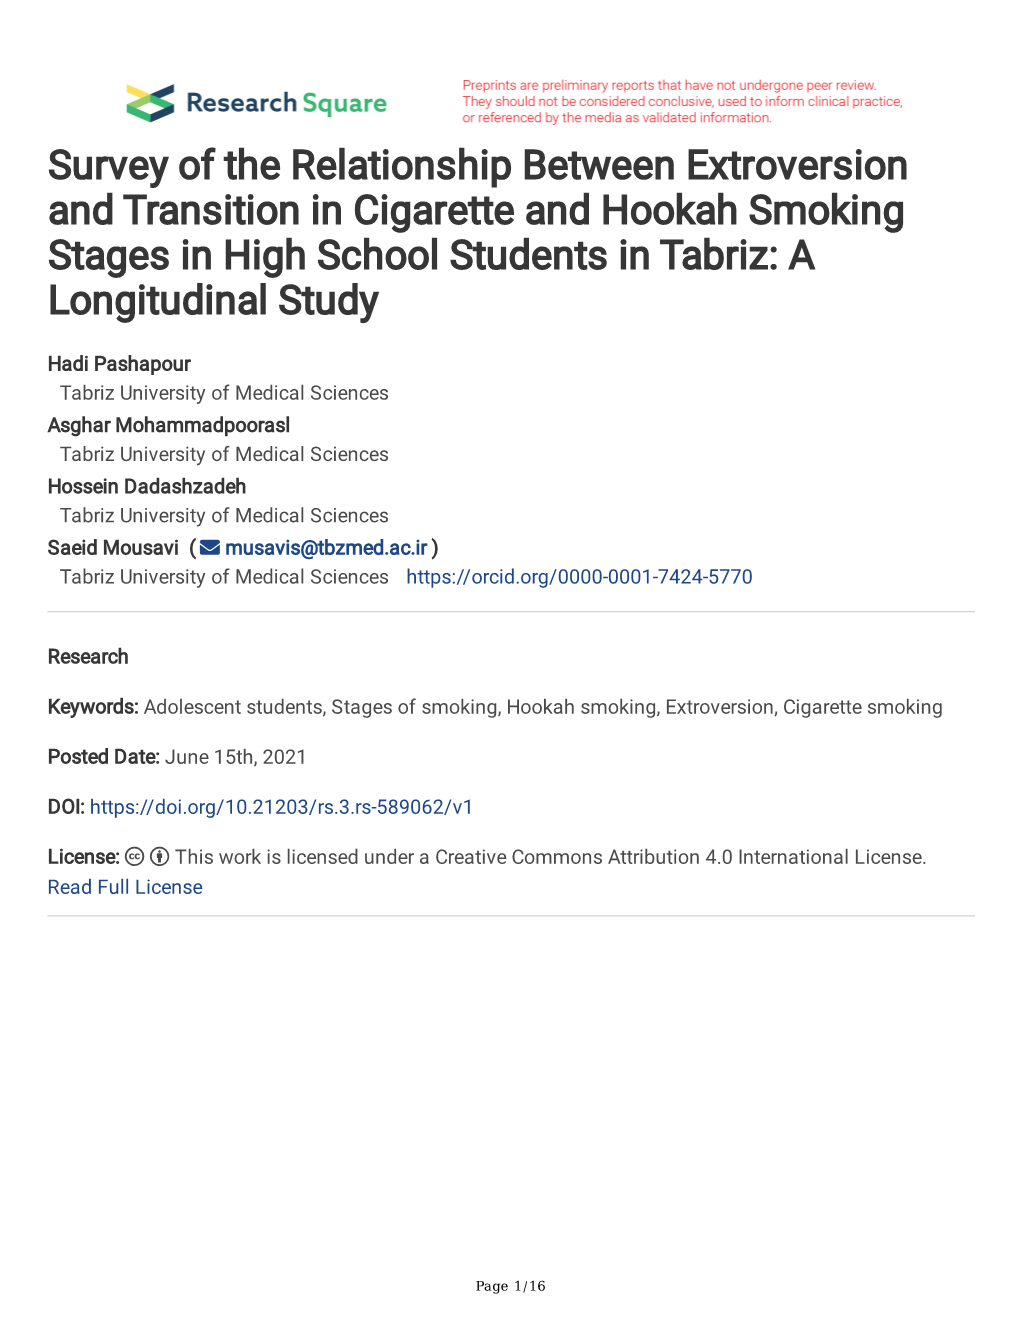 Survey of the Relationship Between Extroversion and Transition in Cigarette and Hookah Smoking Stages in High School Students in Tabriz: a Longitudinal Study